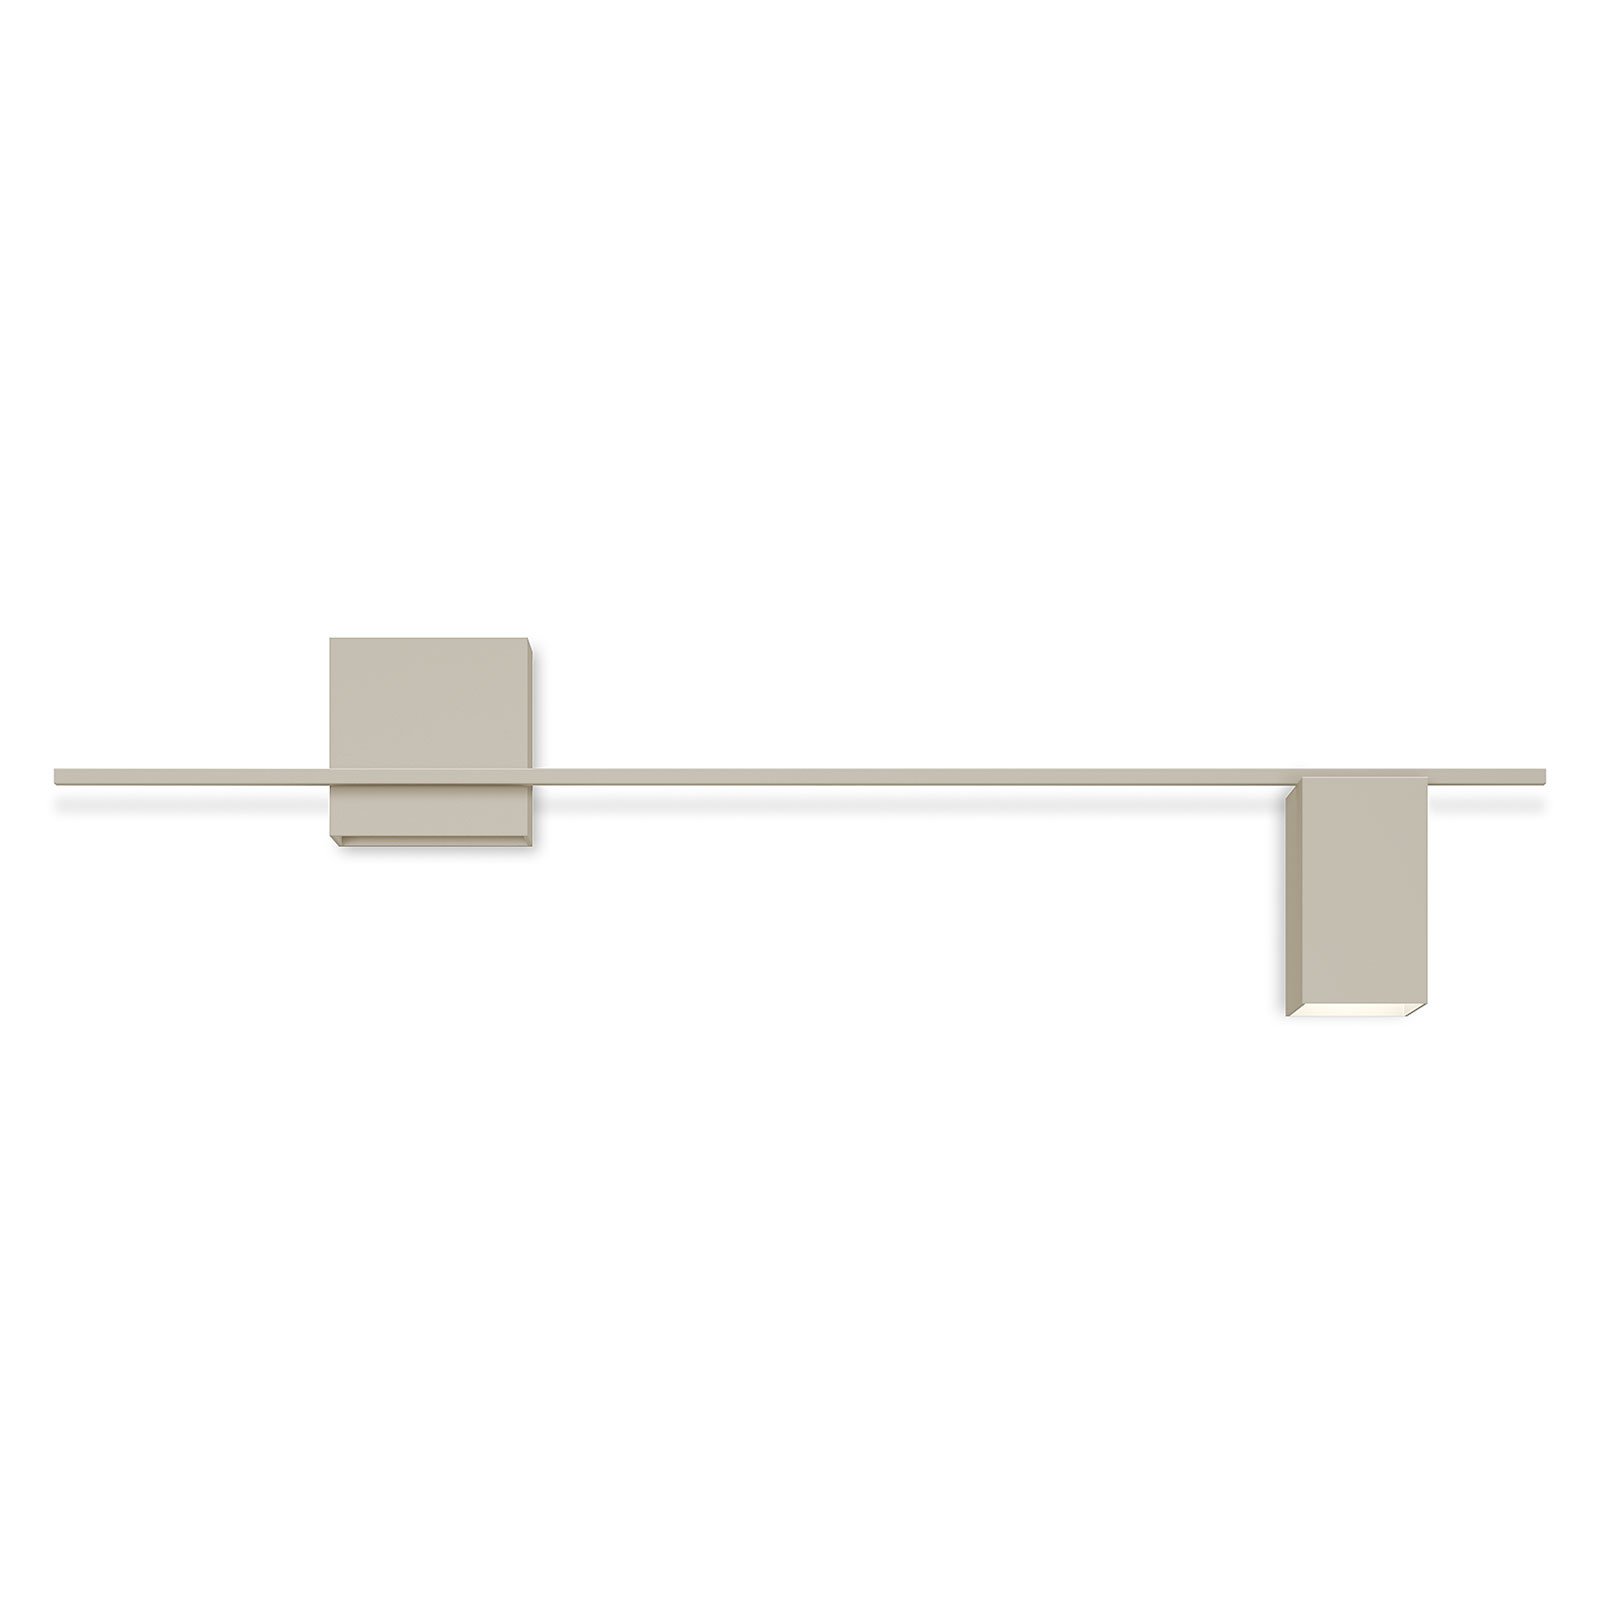 Vibia Structural 2610 LED wall light, cinzento claro